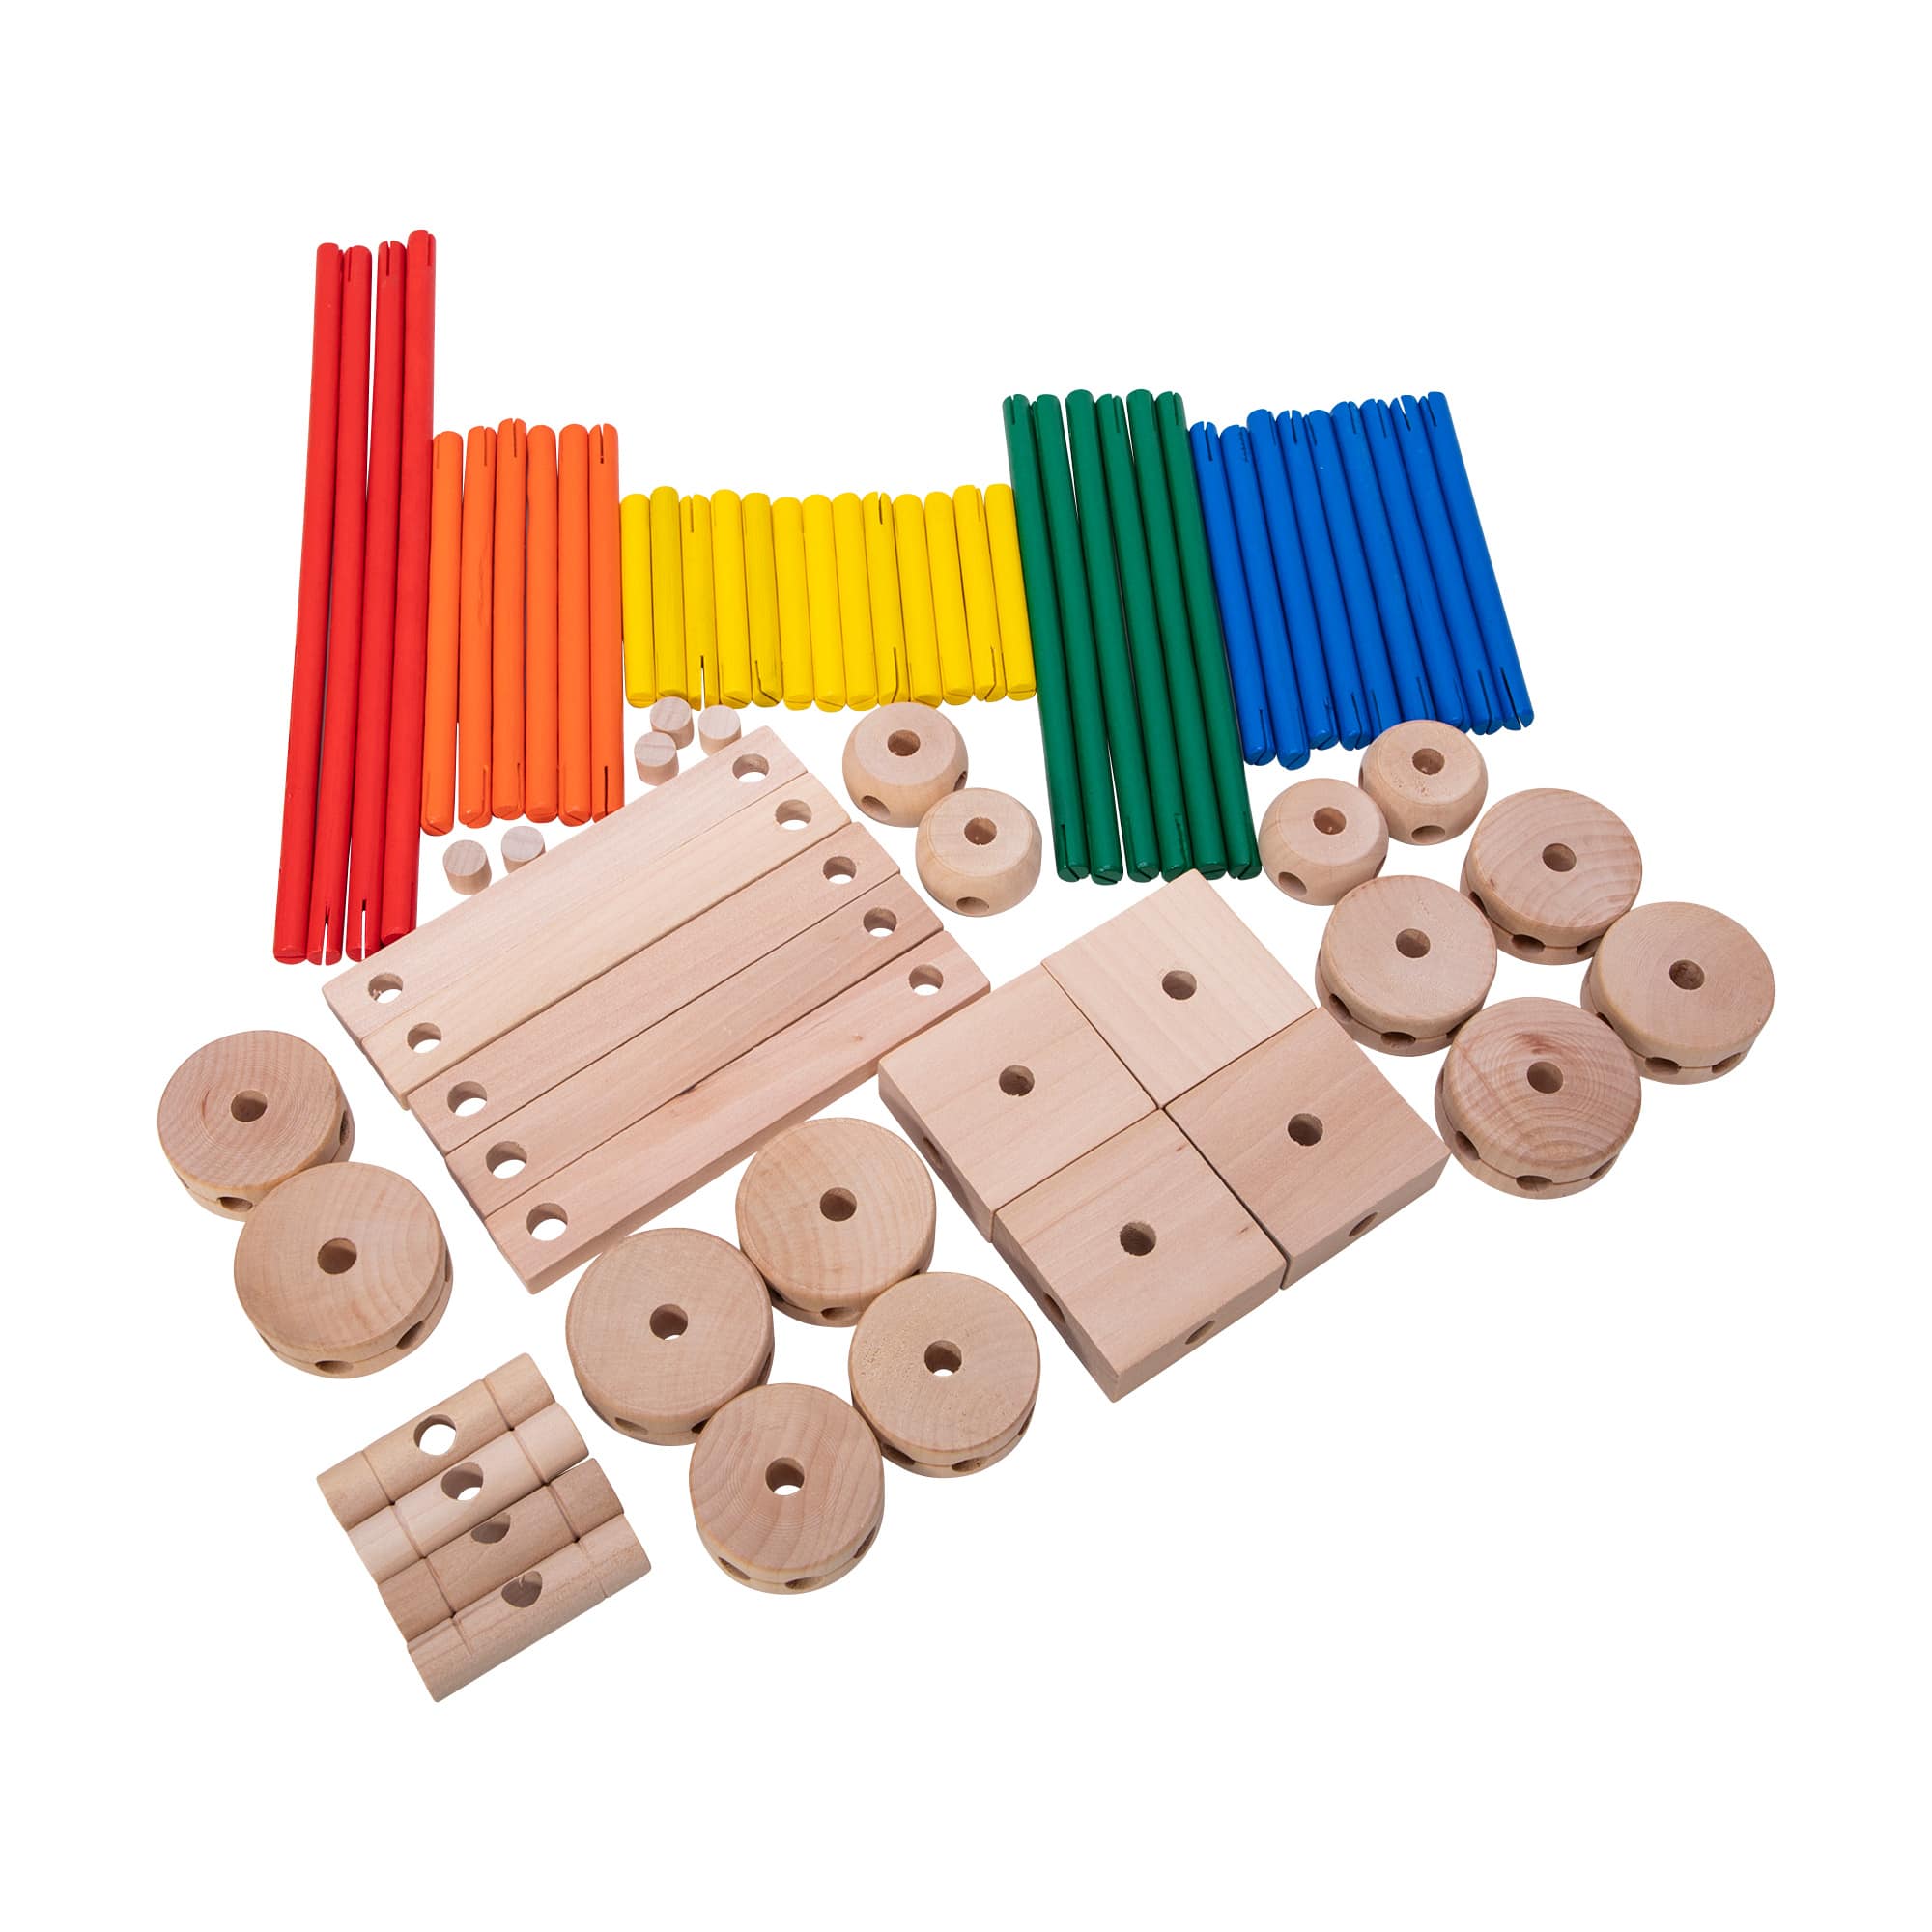 Makit - Classic Wood Construction Toy    